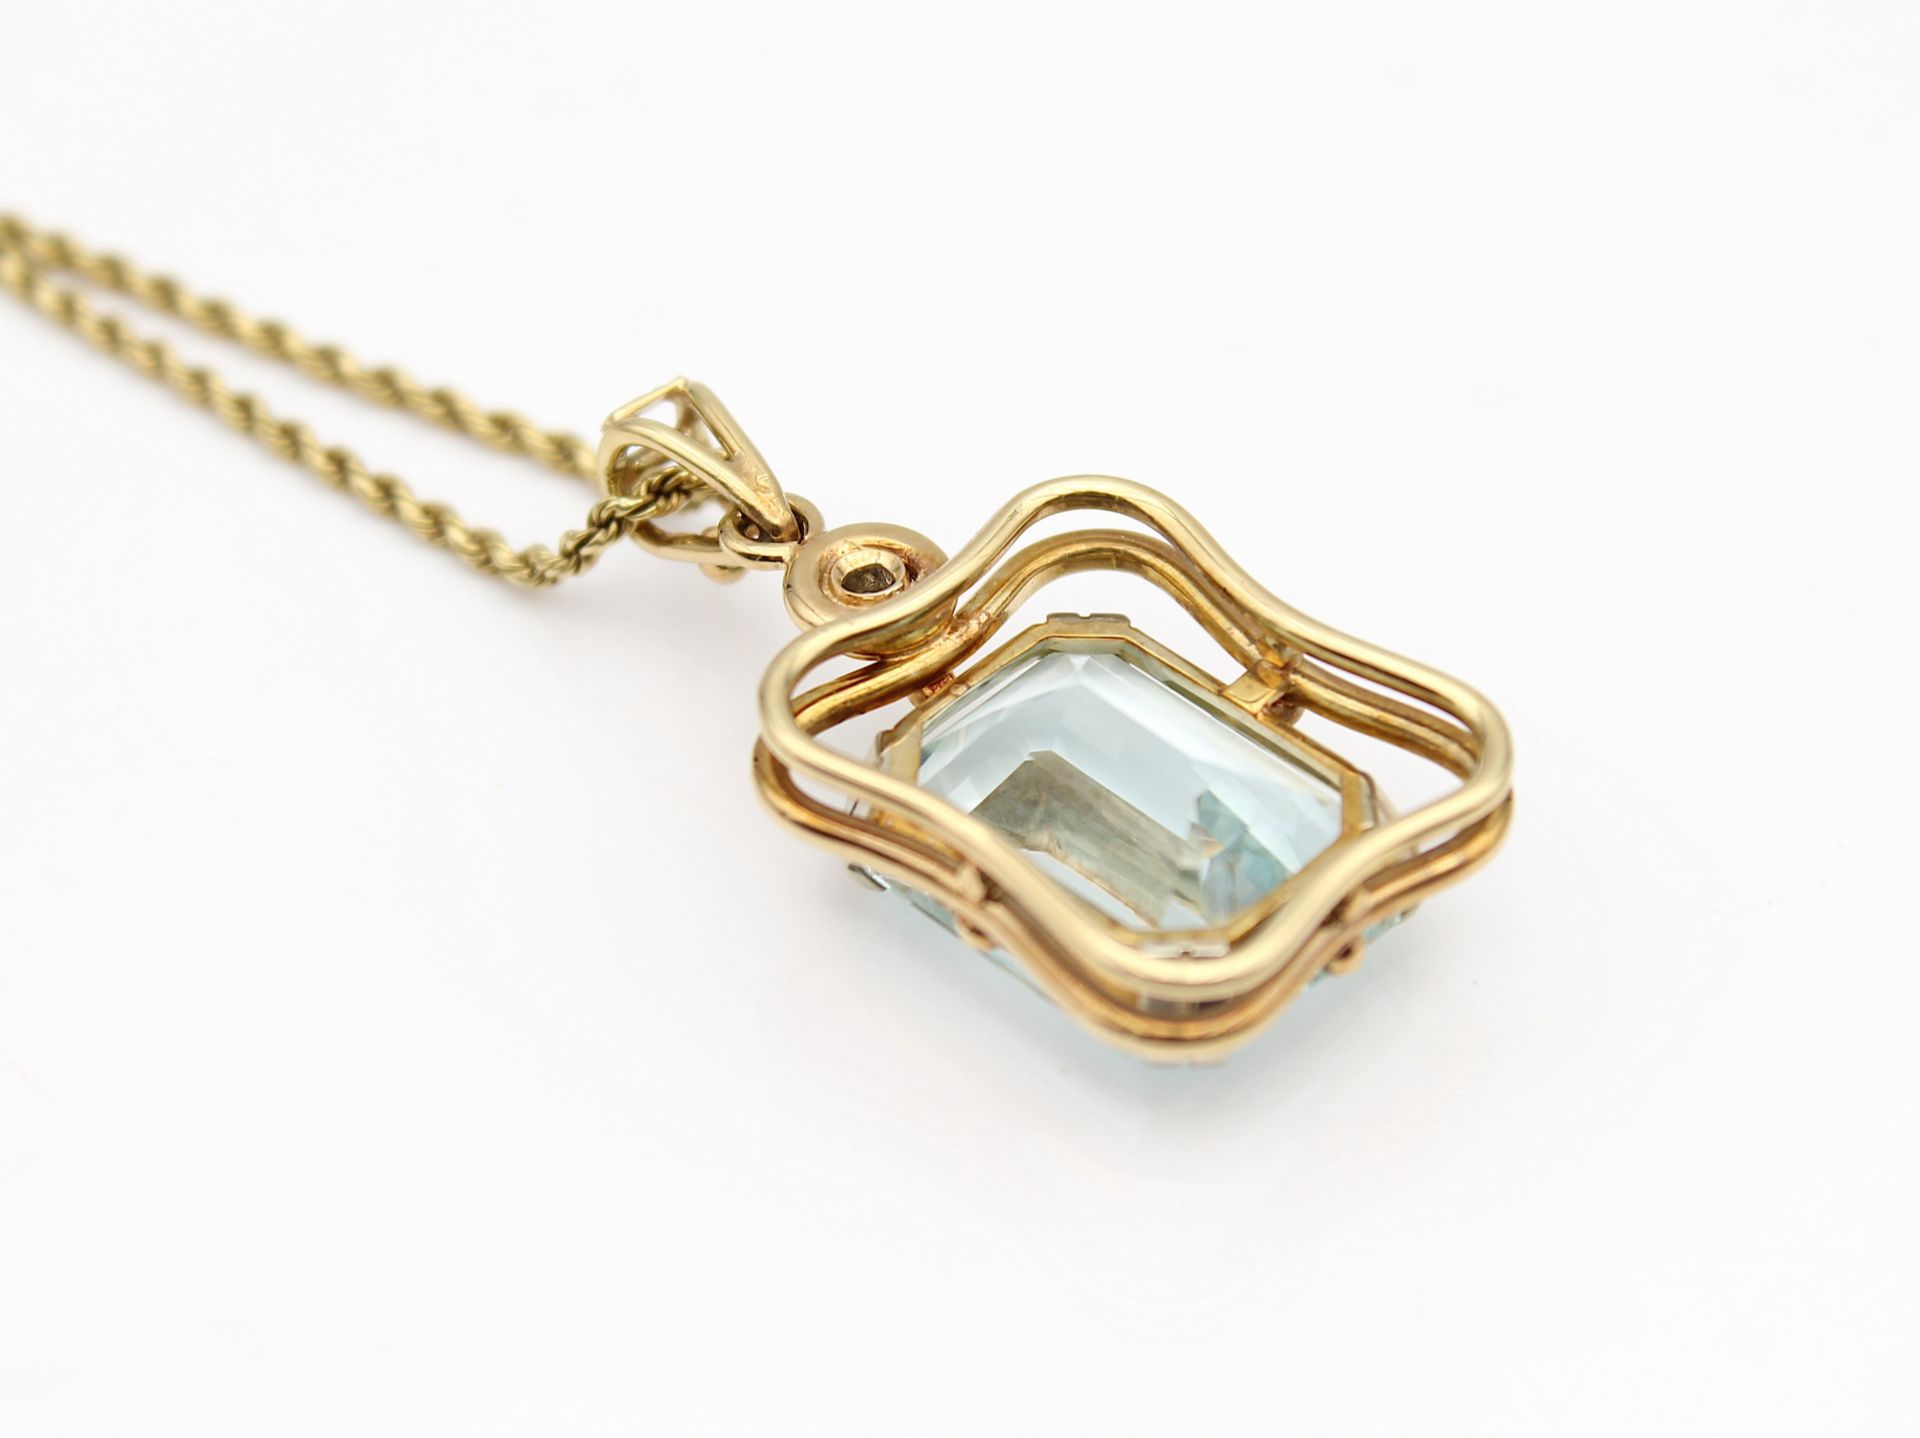 Attractive pendant with a beautiful aquamarine  - Image 3 of 3